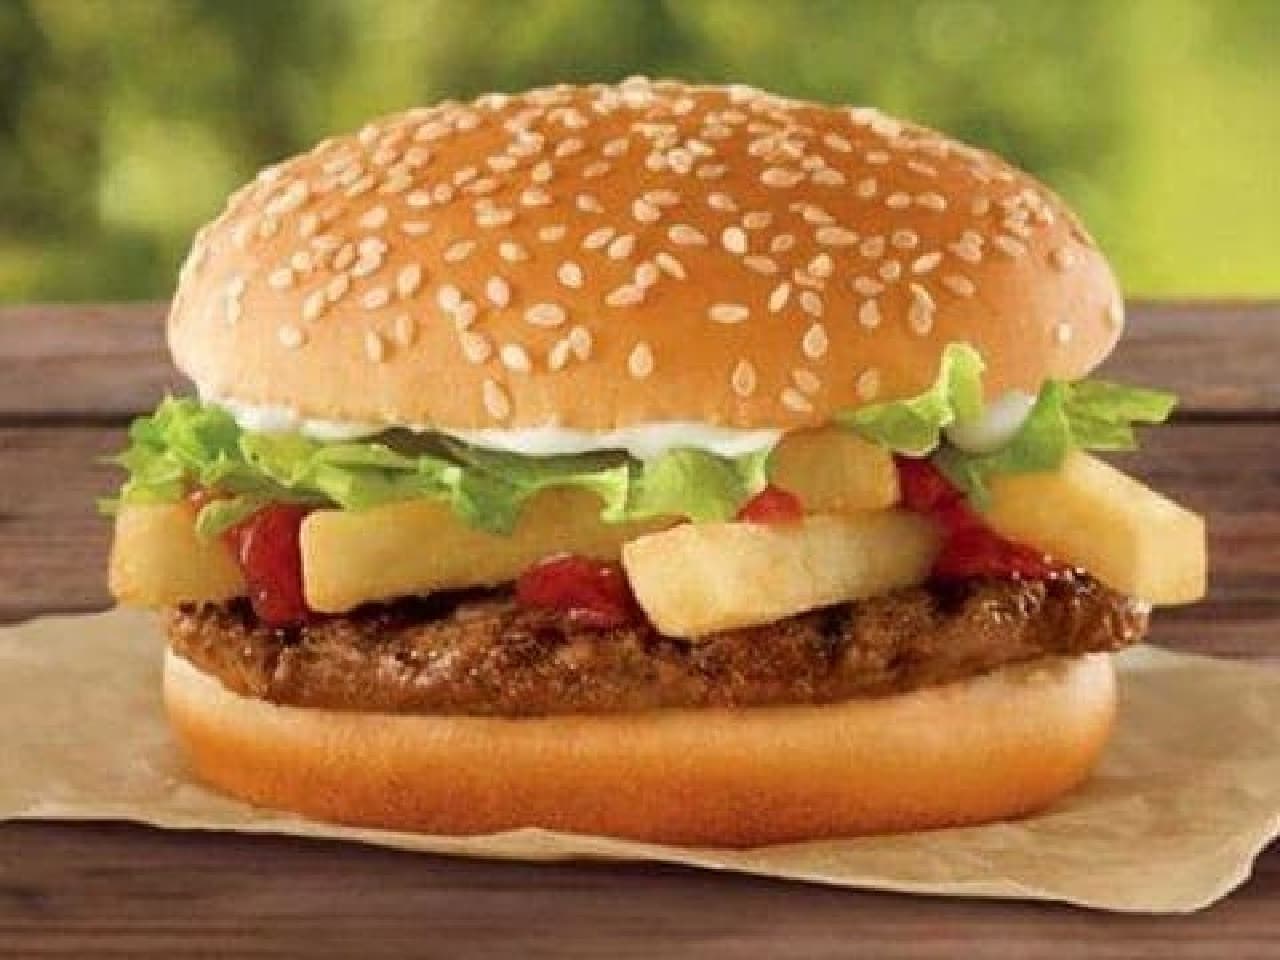 Contains 4 french fries! "French fries burger" from Burger King, USA